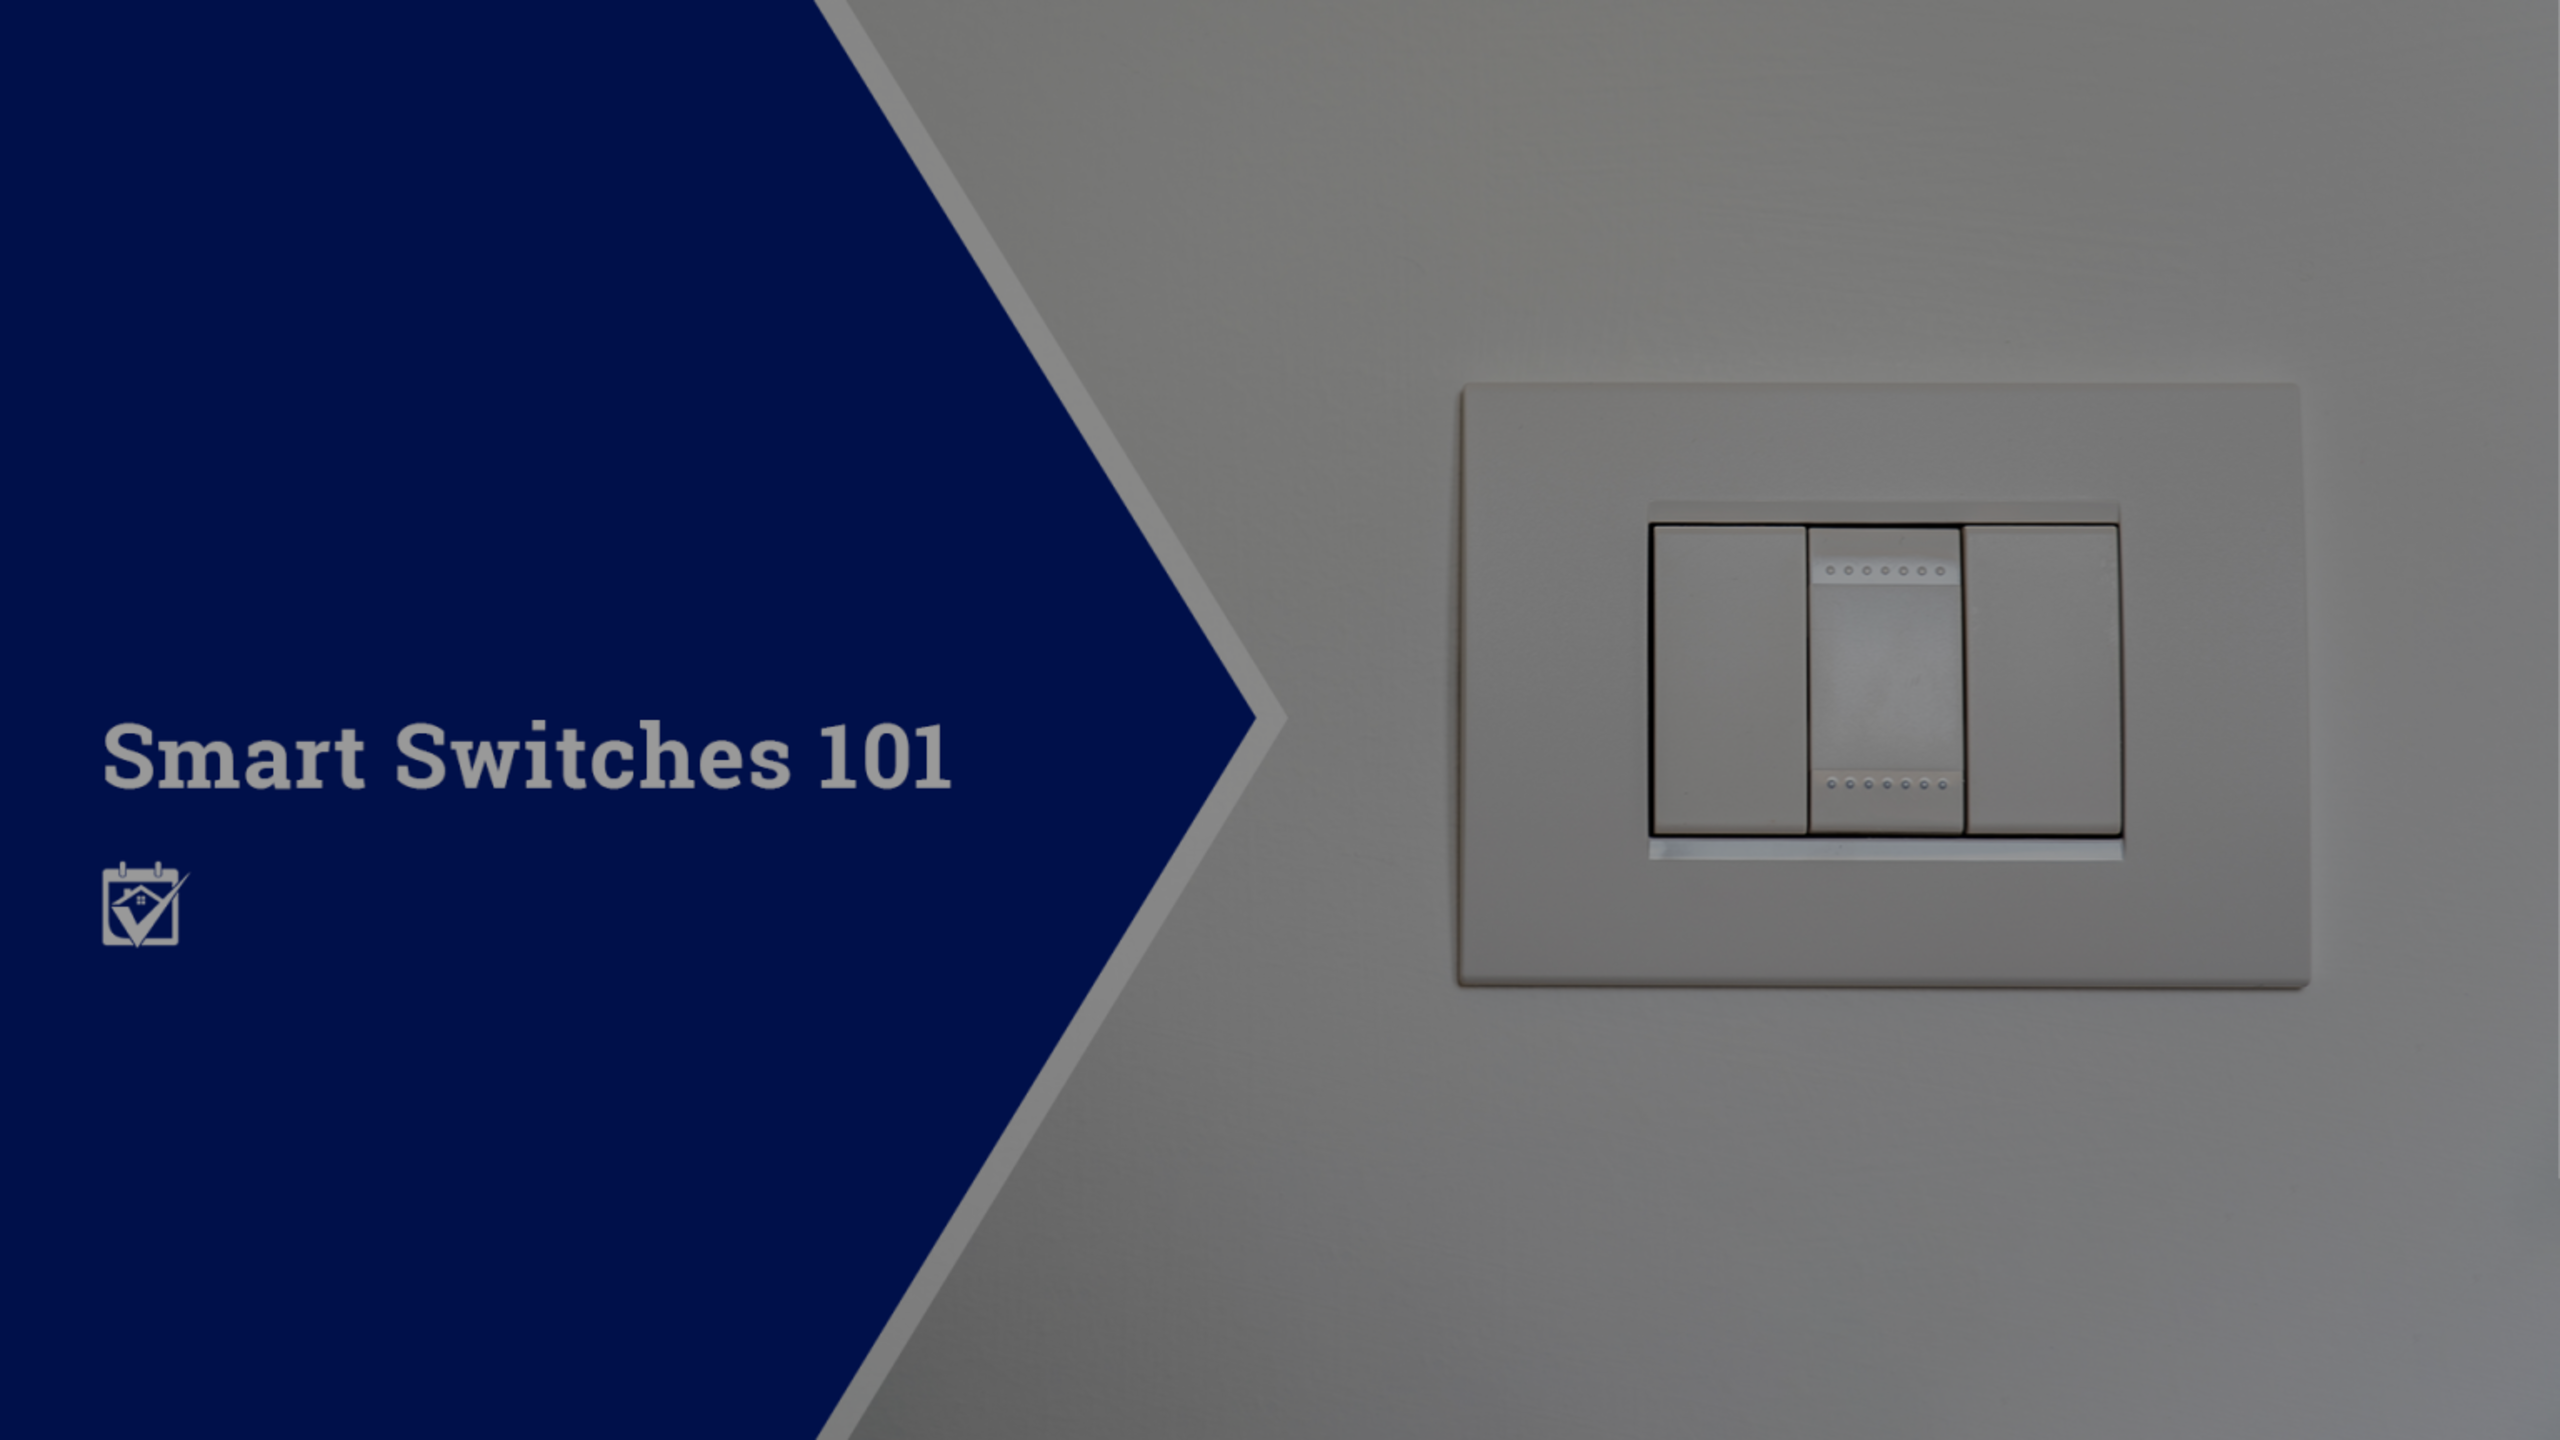 Smart Switches 101